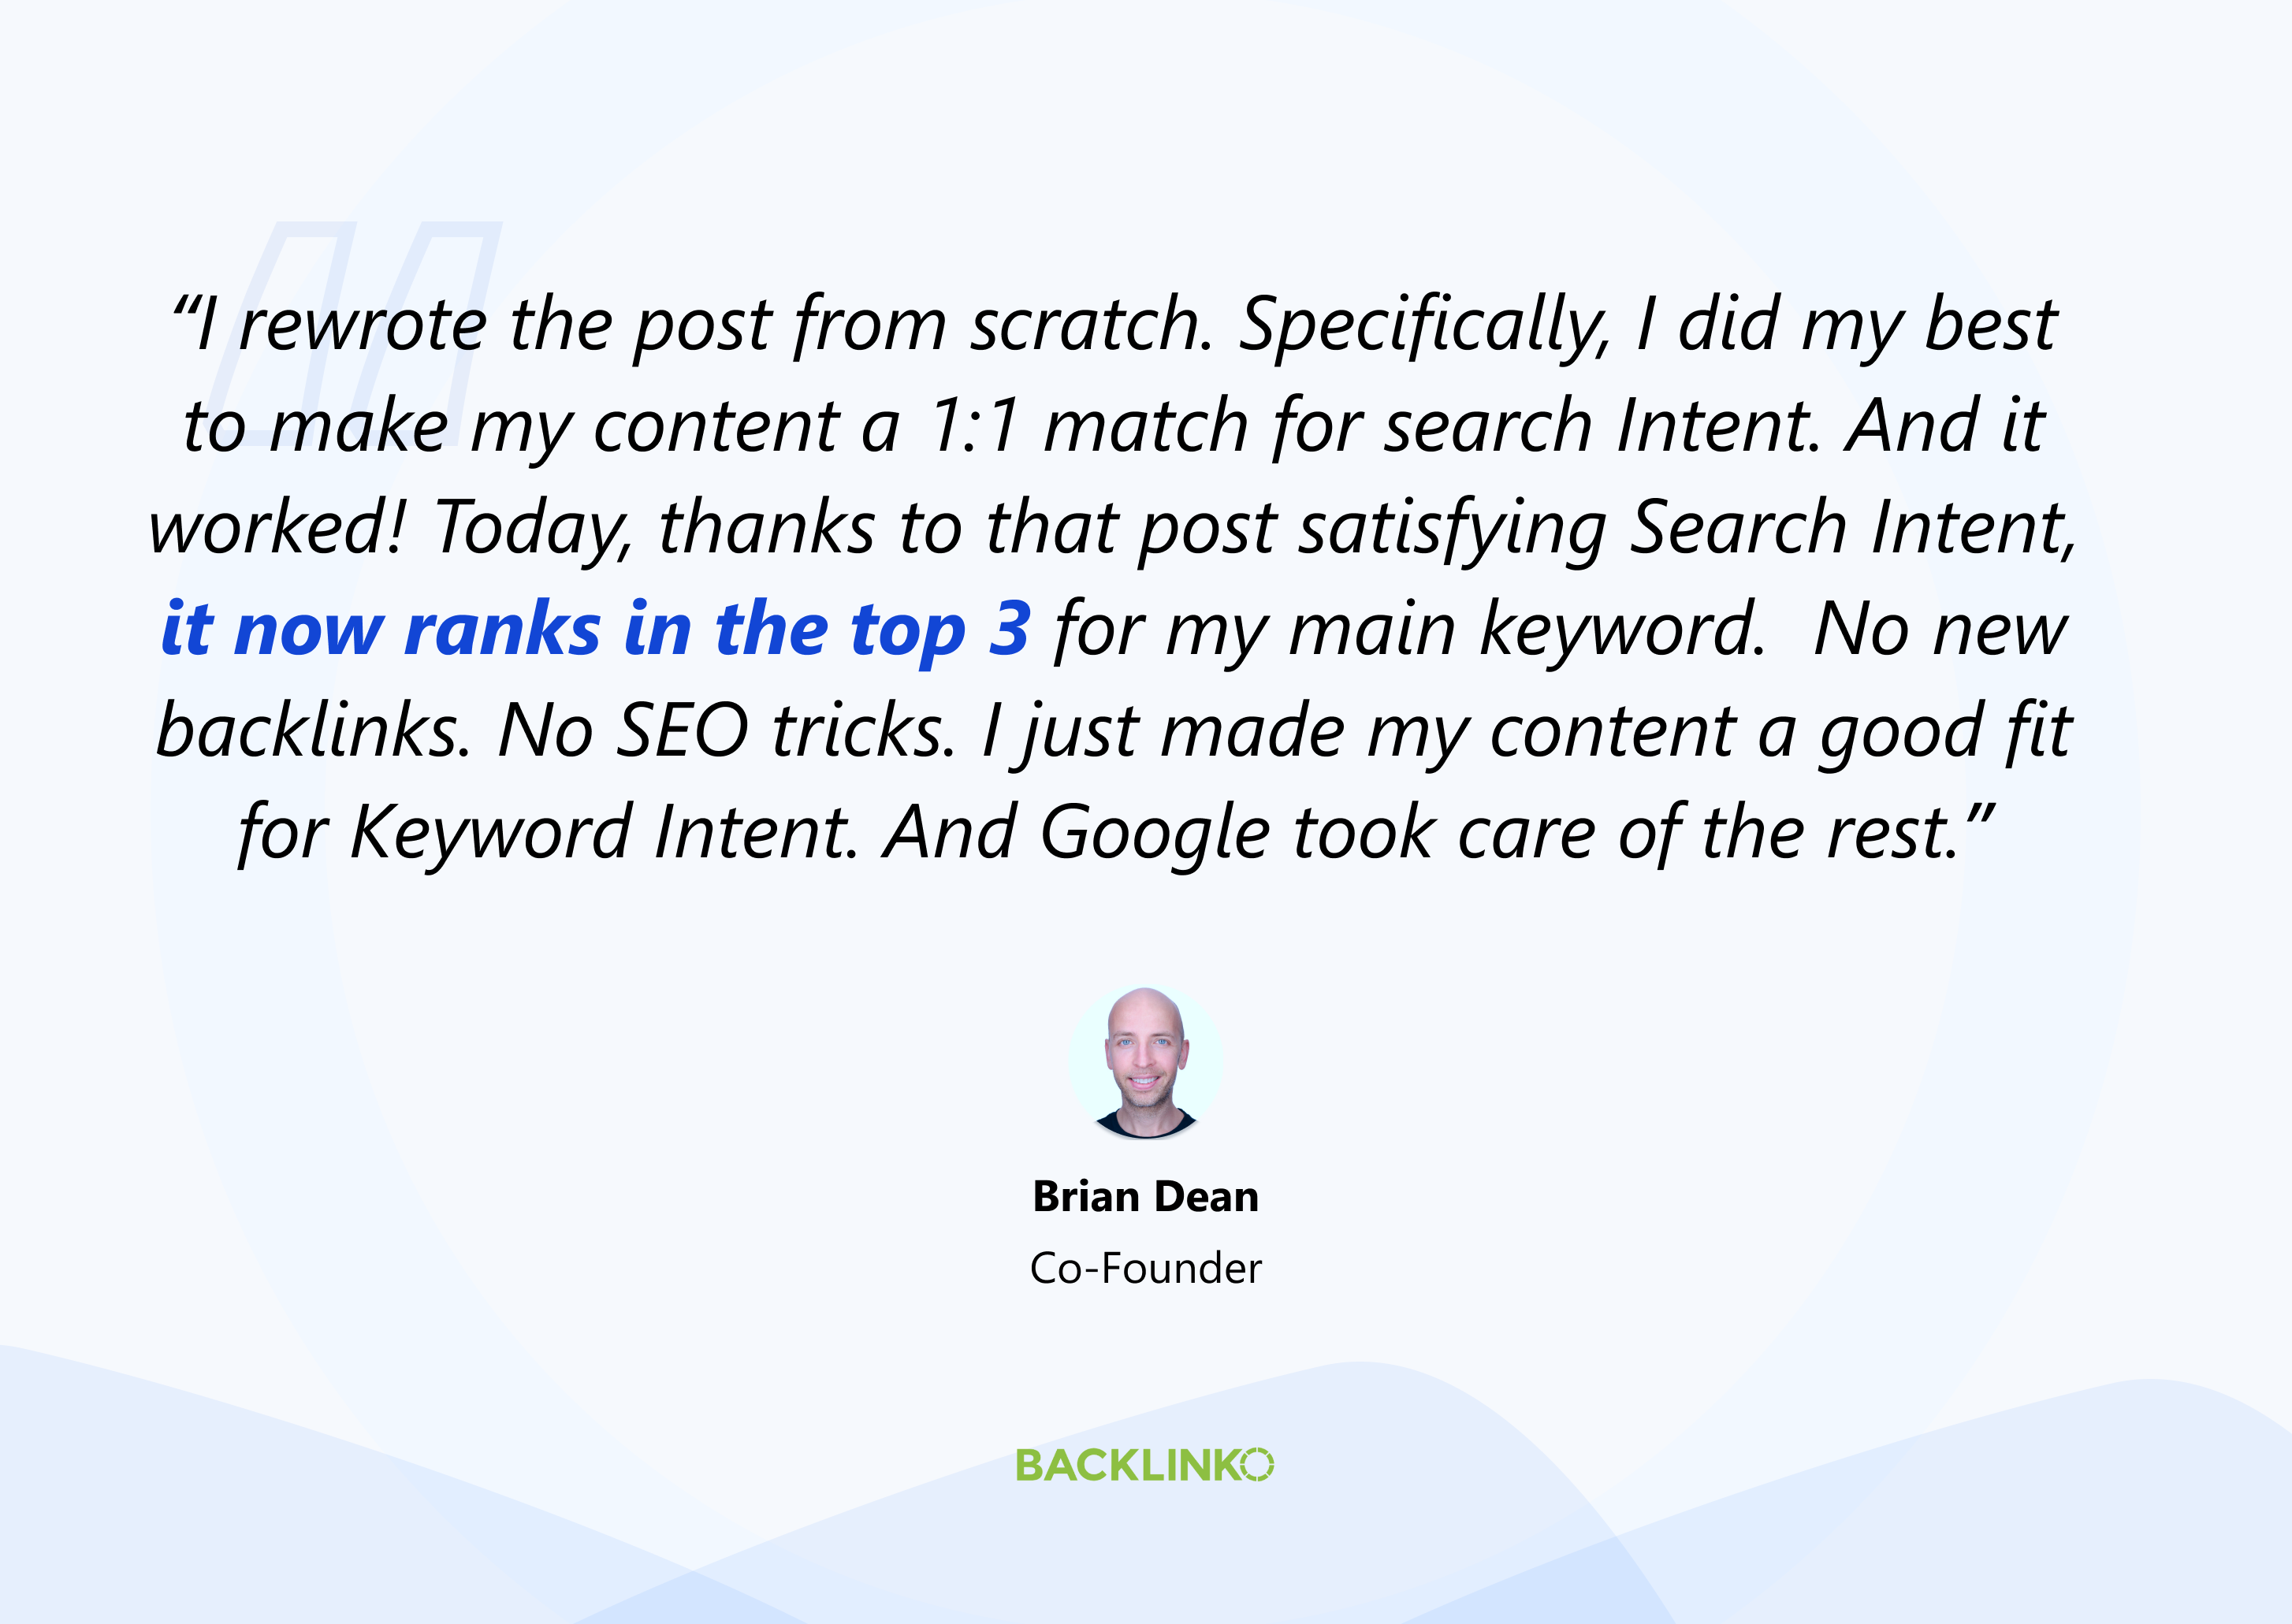 Brian Dean's quote about search intent